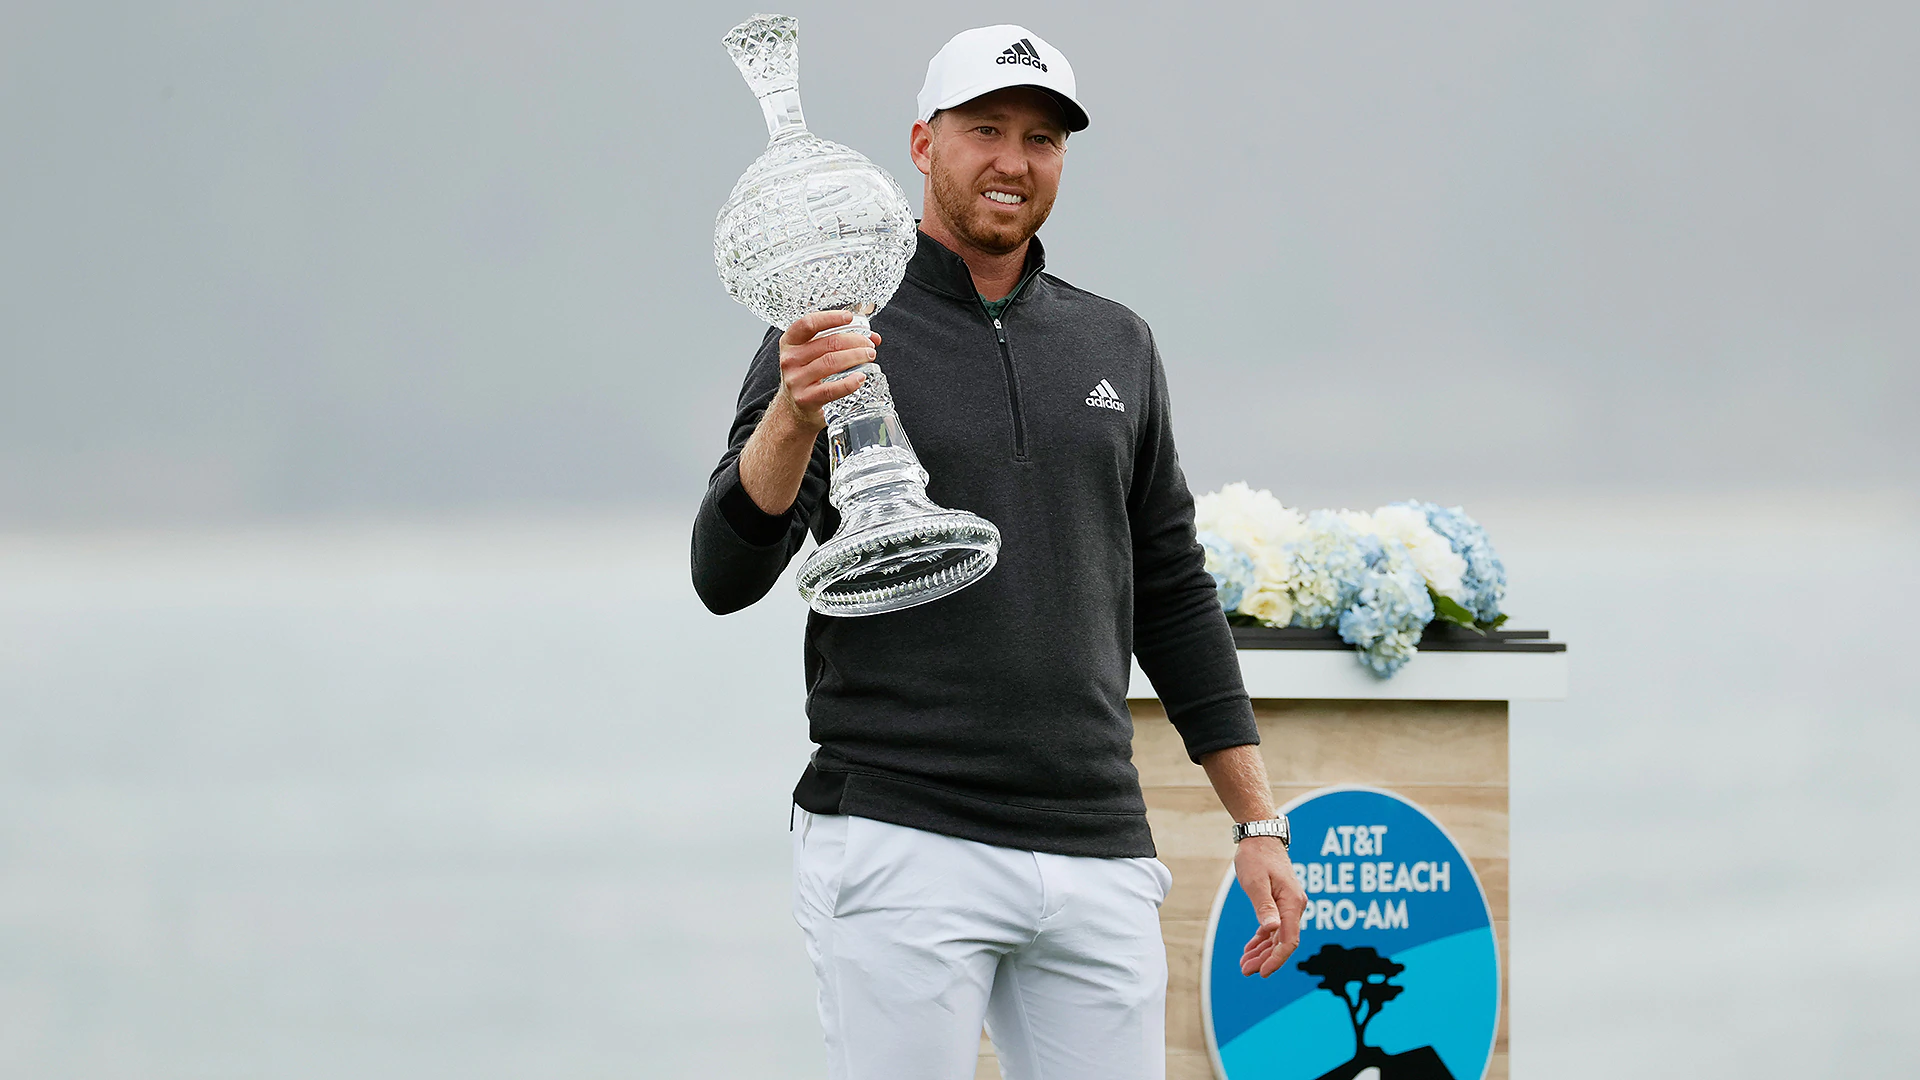 Daniel Berger eagles 72nd hole to win AT&T Pebble Beach Pro-Am